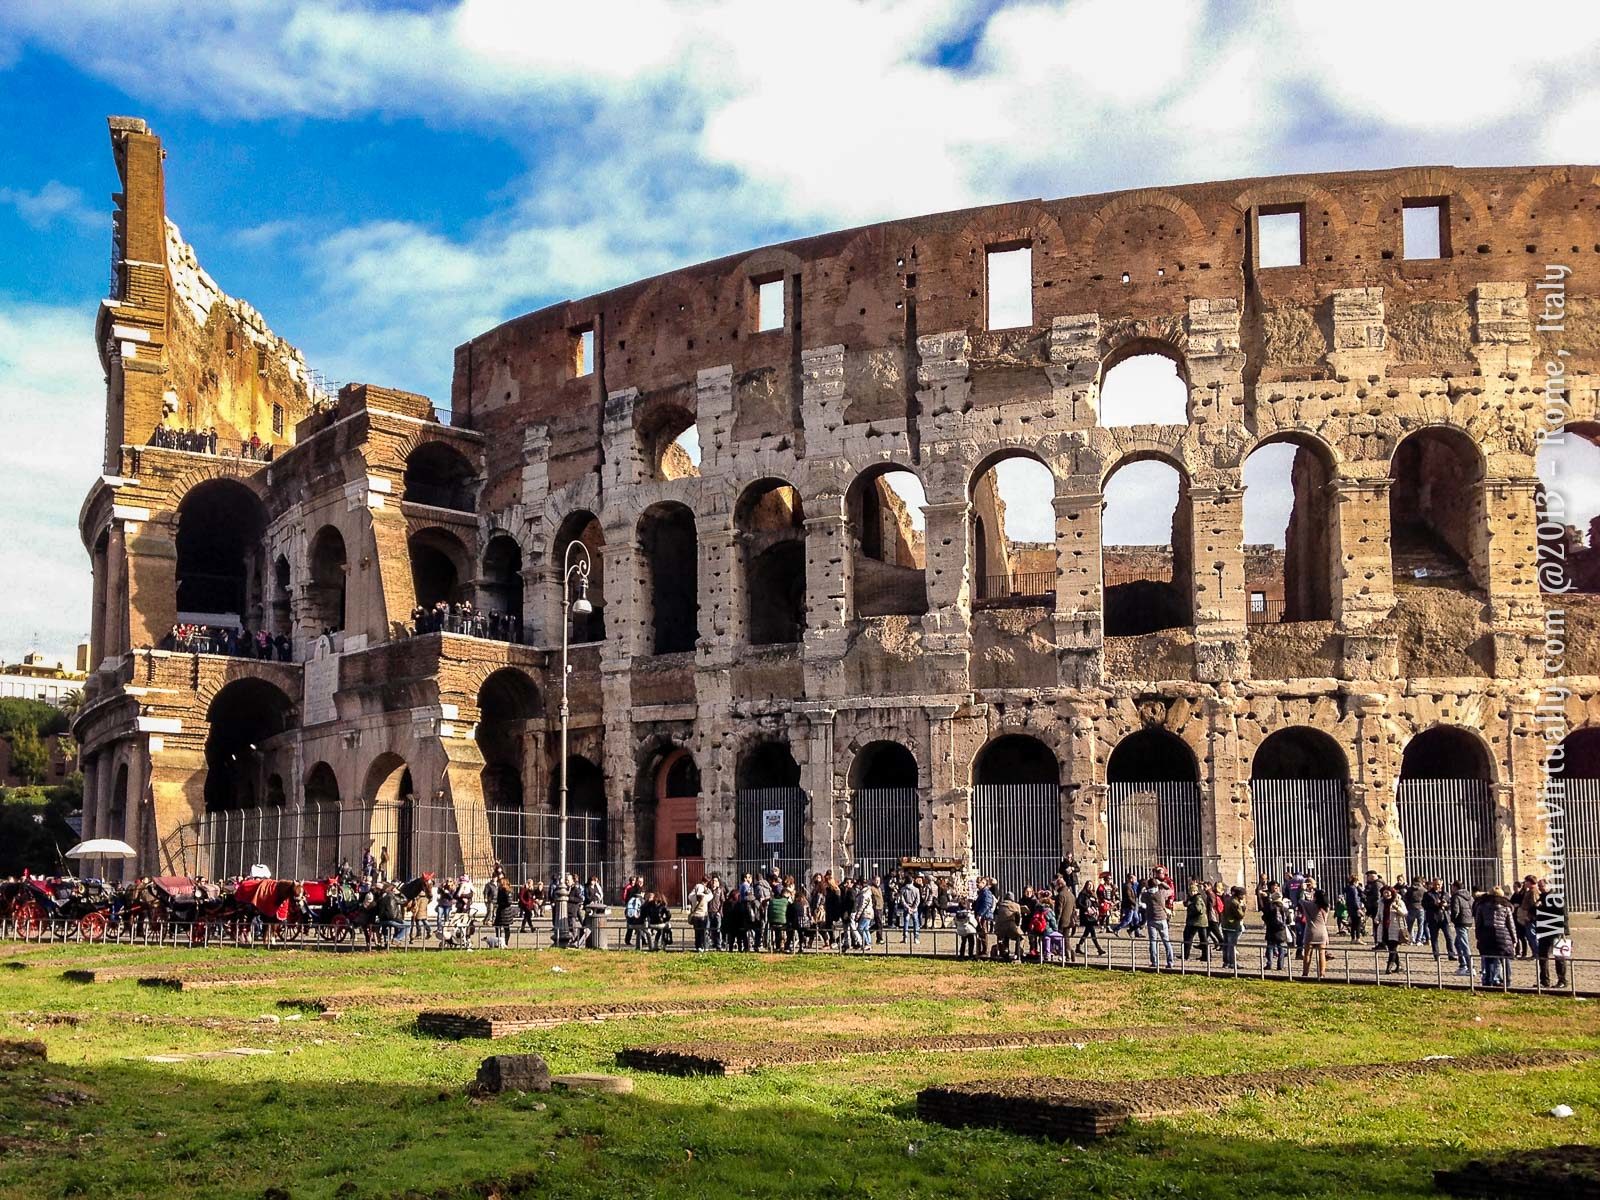 Developed in the late 1st century for the entertainment of the masses under the Flavian emperors, the colosseum was called the Flavian Amphitheatre (Anfiteatro Flavio). Rome, Italy.